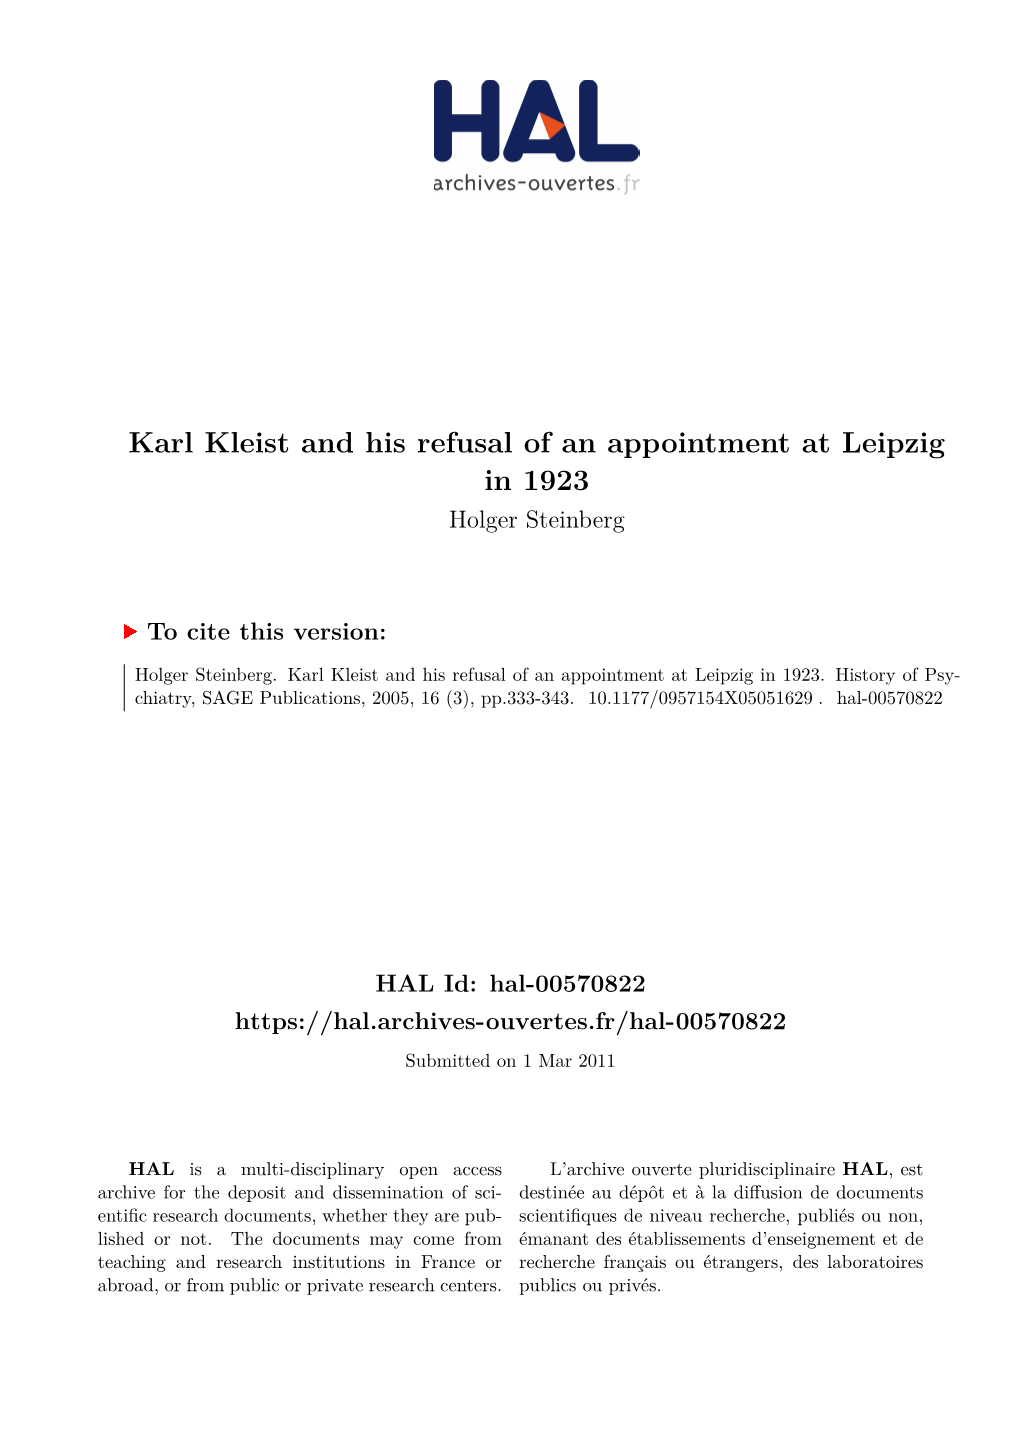 Karl Kleist and His Refusal of an Appointment at Leipzig in 1923 Holger Steinberg